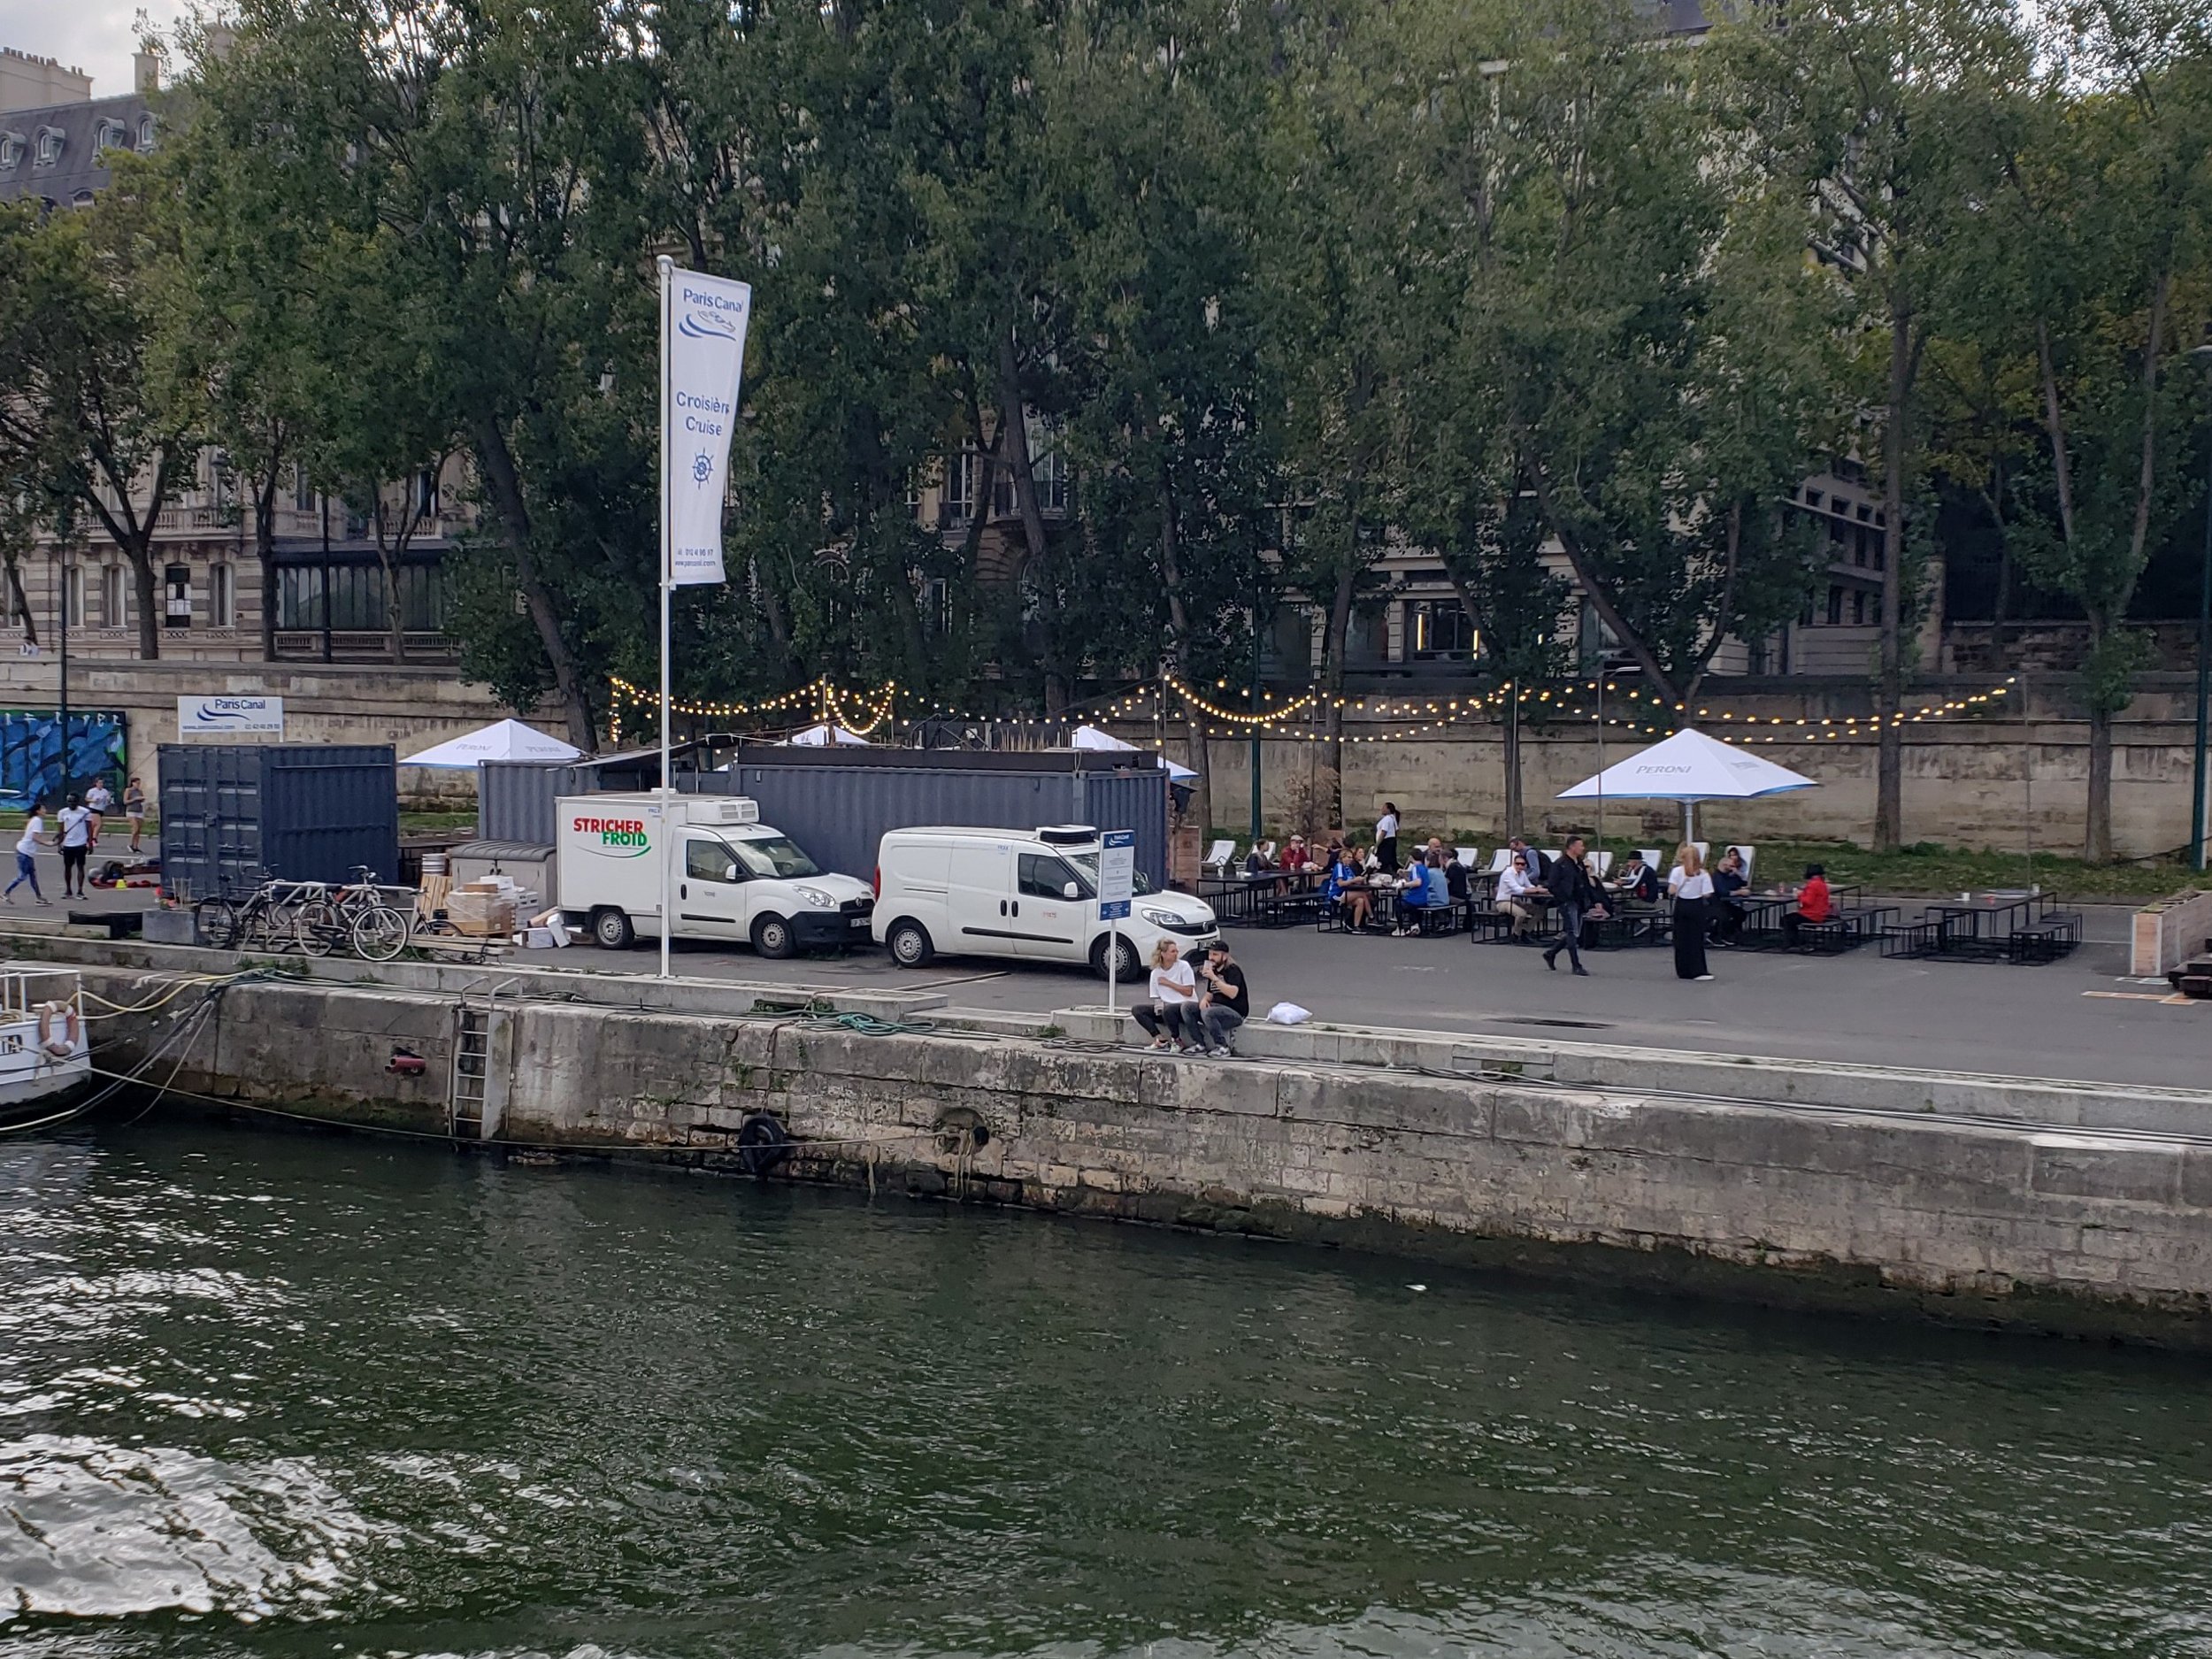 A cafe with outdoor seating along the Seine